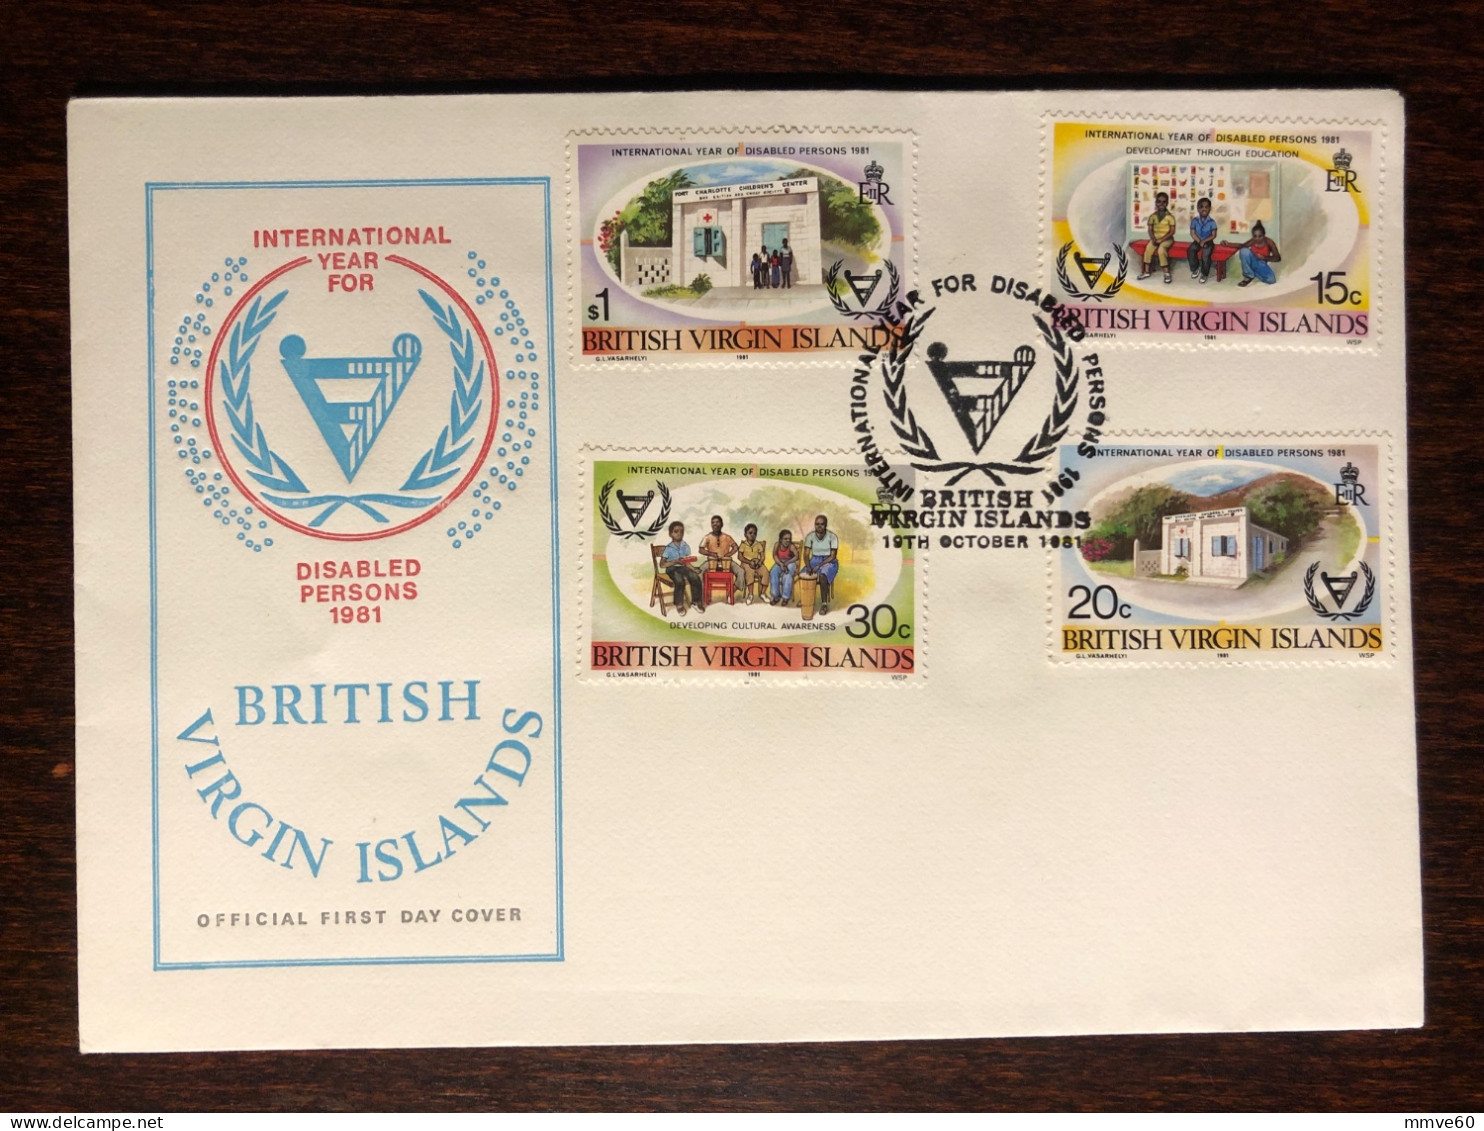 VIRGIN ISLANDS FDC COVER 1981 YEAR DISABLED PEOPLE HEALTH MEDICINE STAMPS - British Virgin Islands